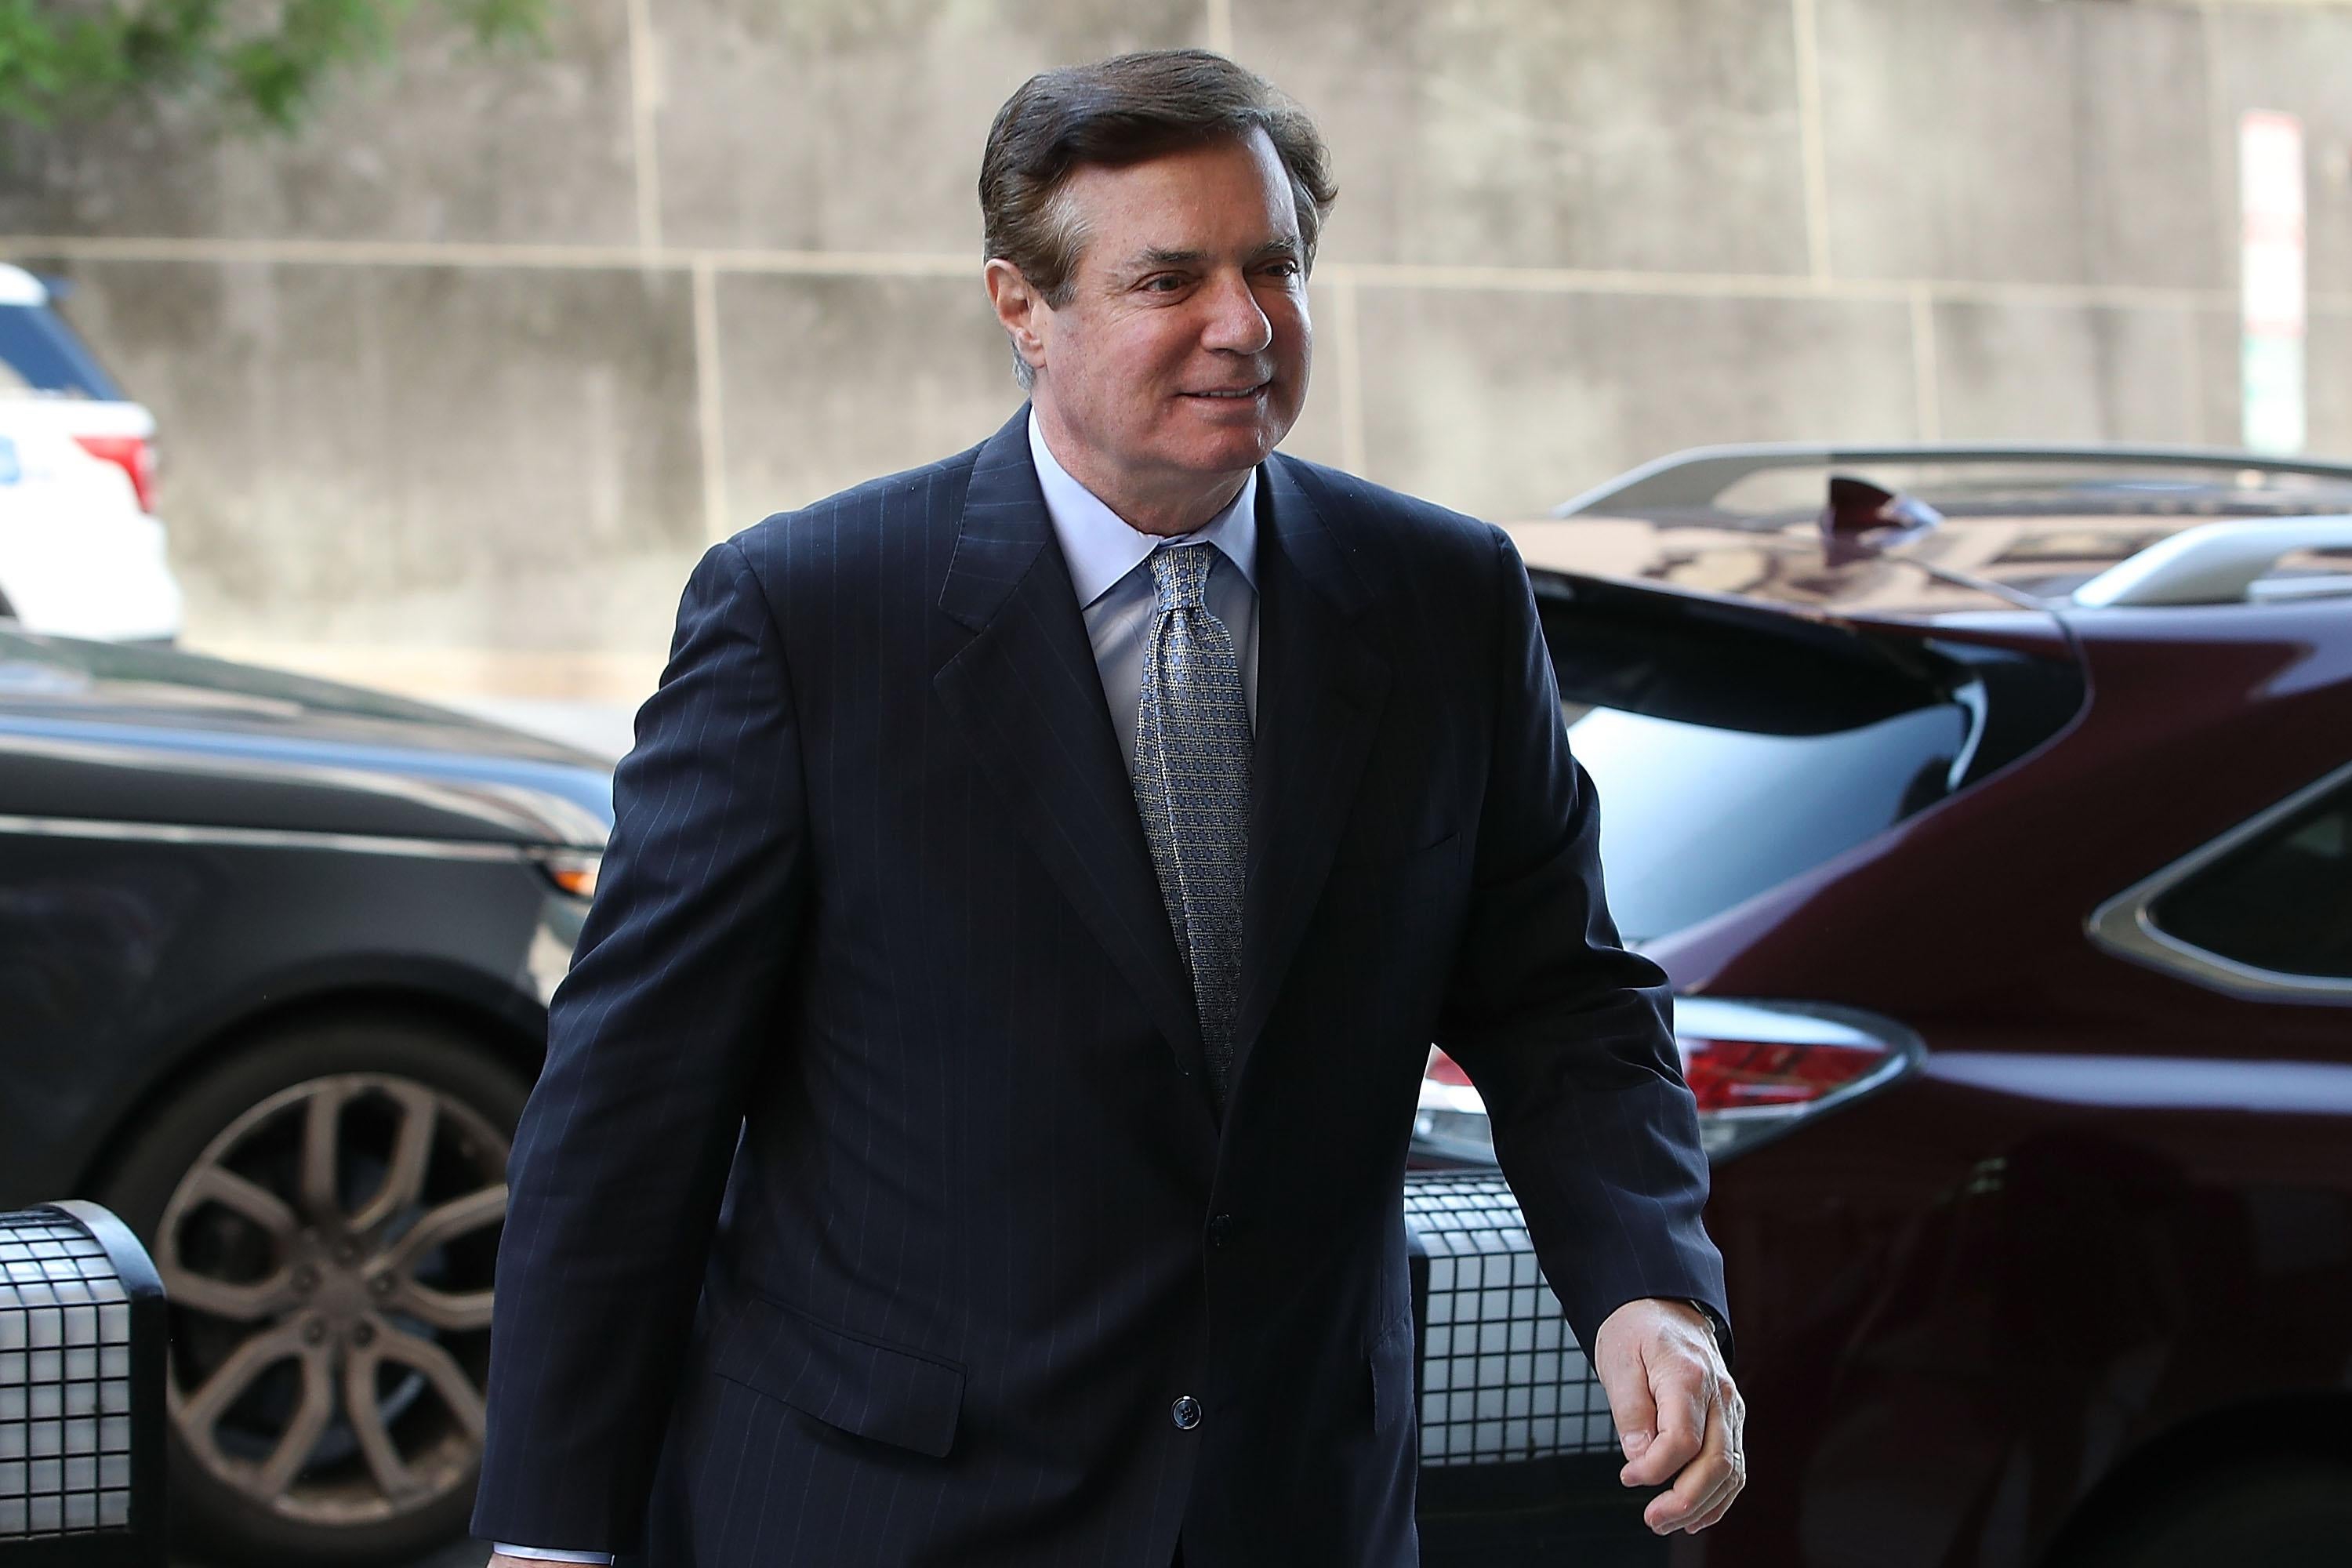 Former Trump campaign manager Paul Manafort arrives for a hearing on May 23, 2018 in Washington, DC. 